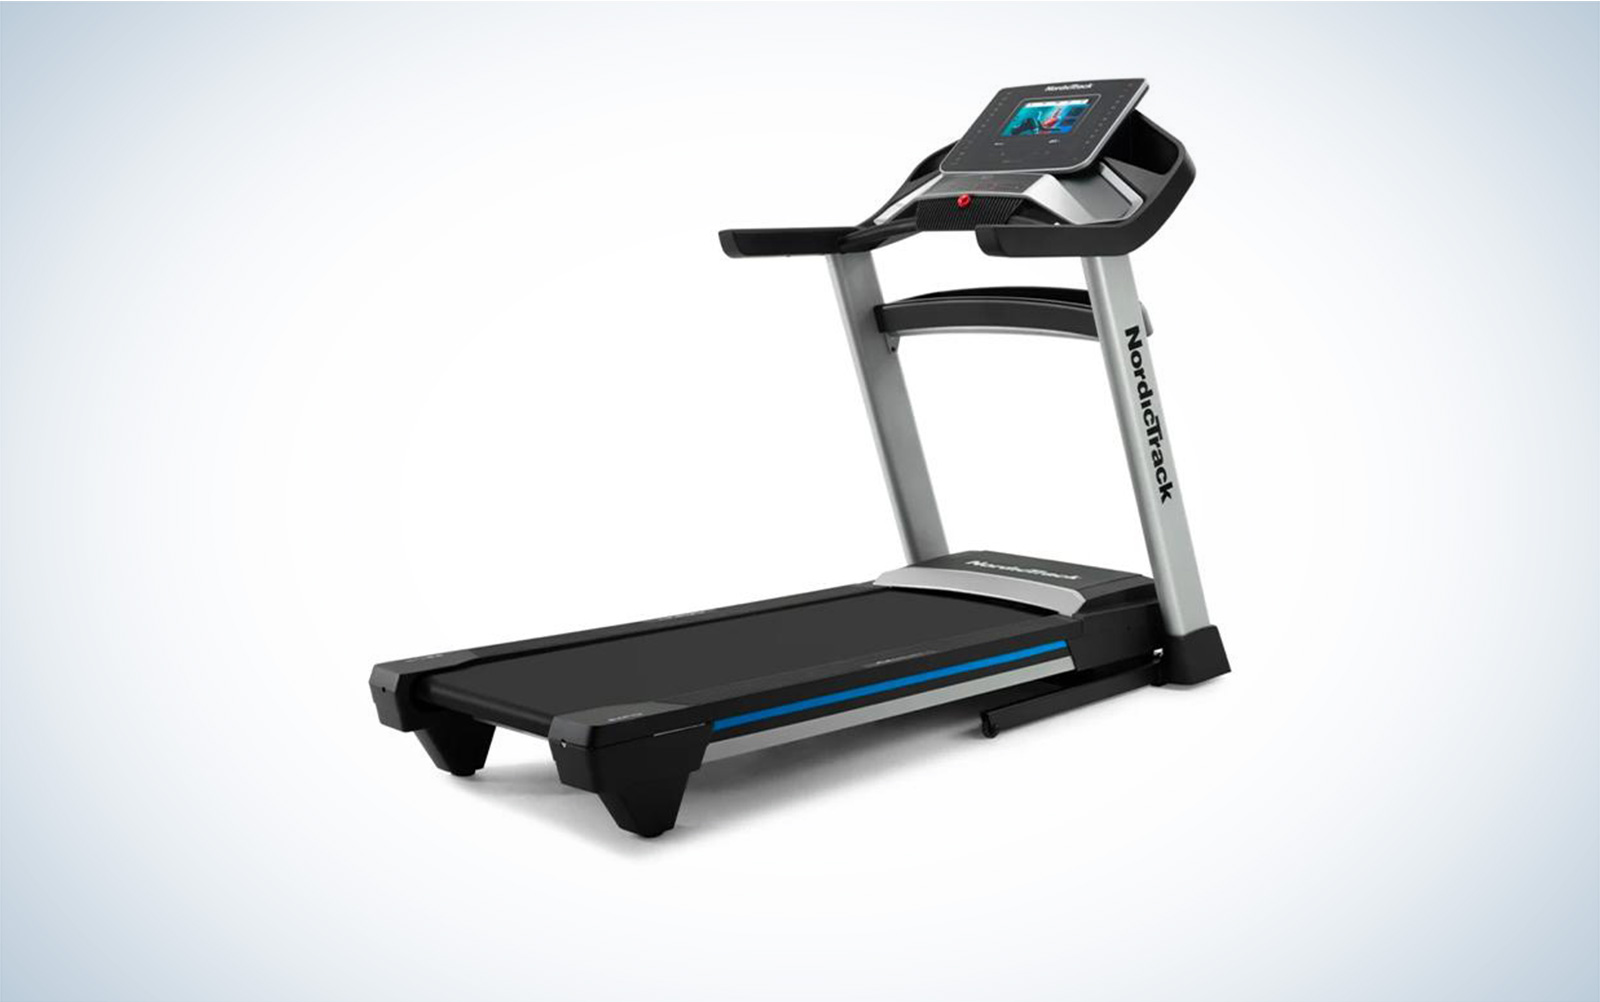 NordicTrack 10i treadmill on a plain background